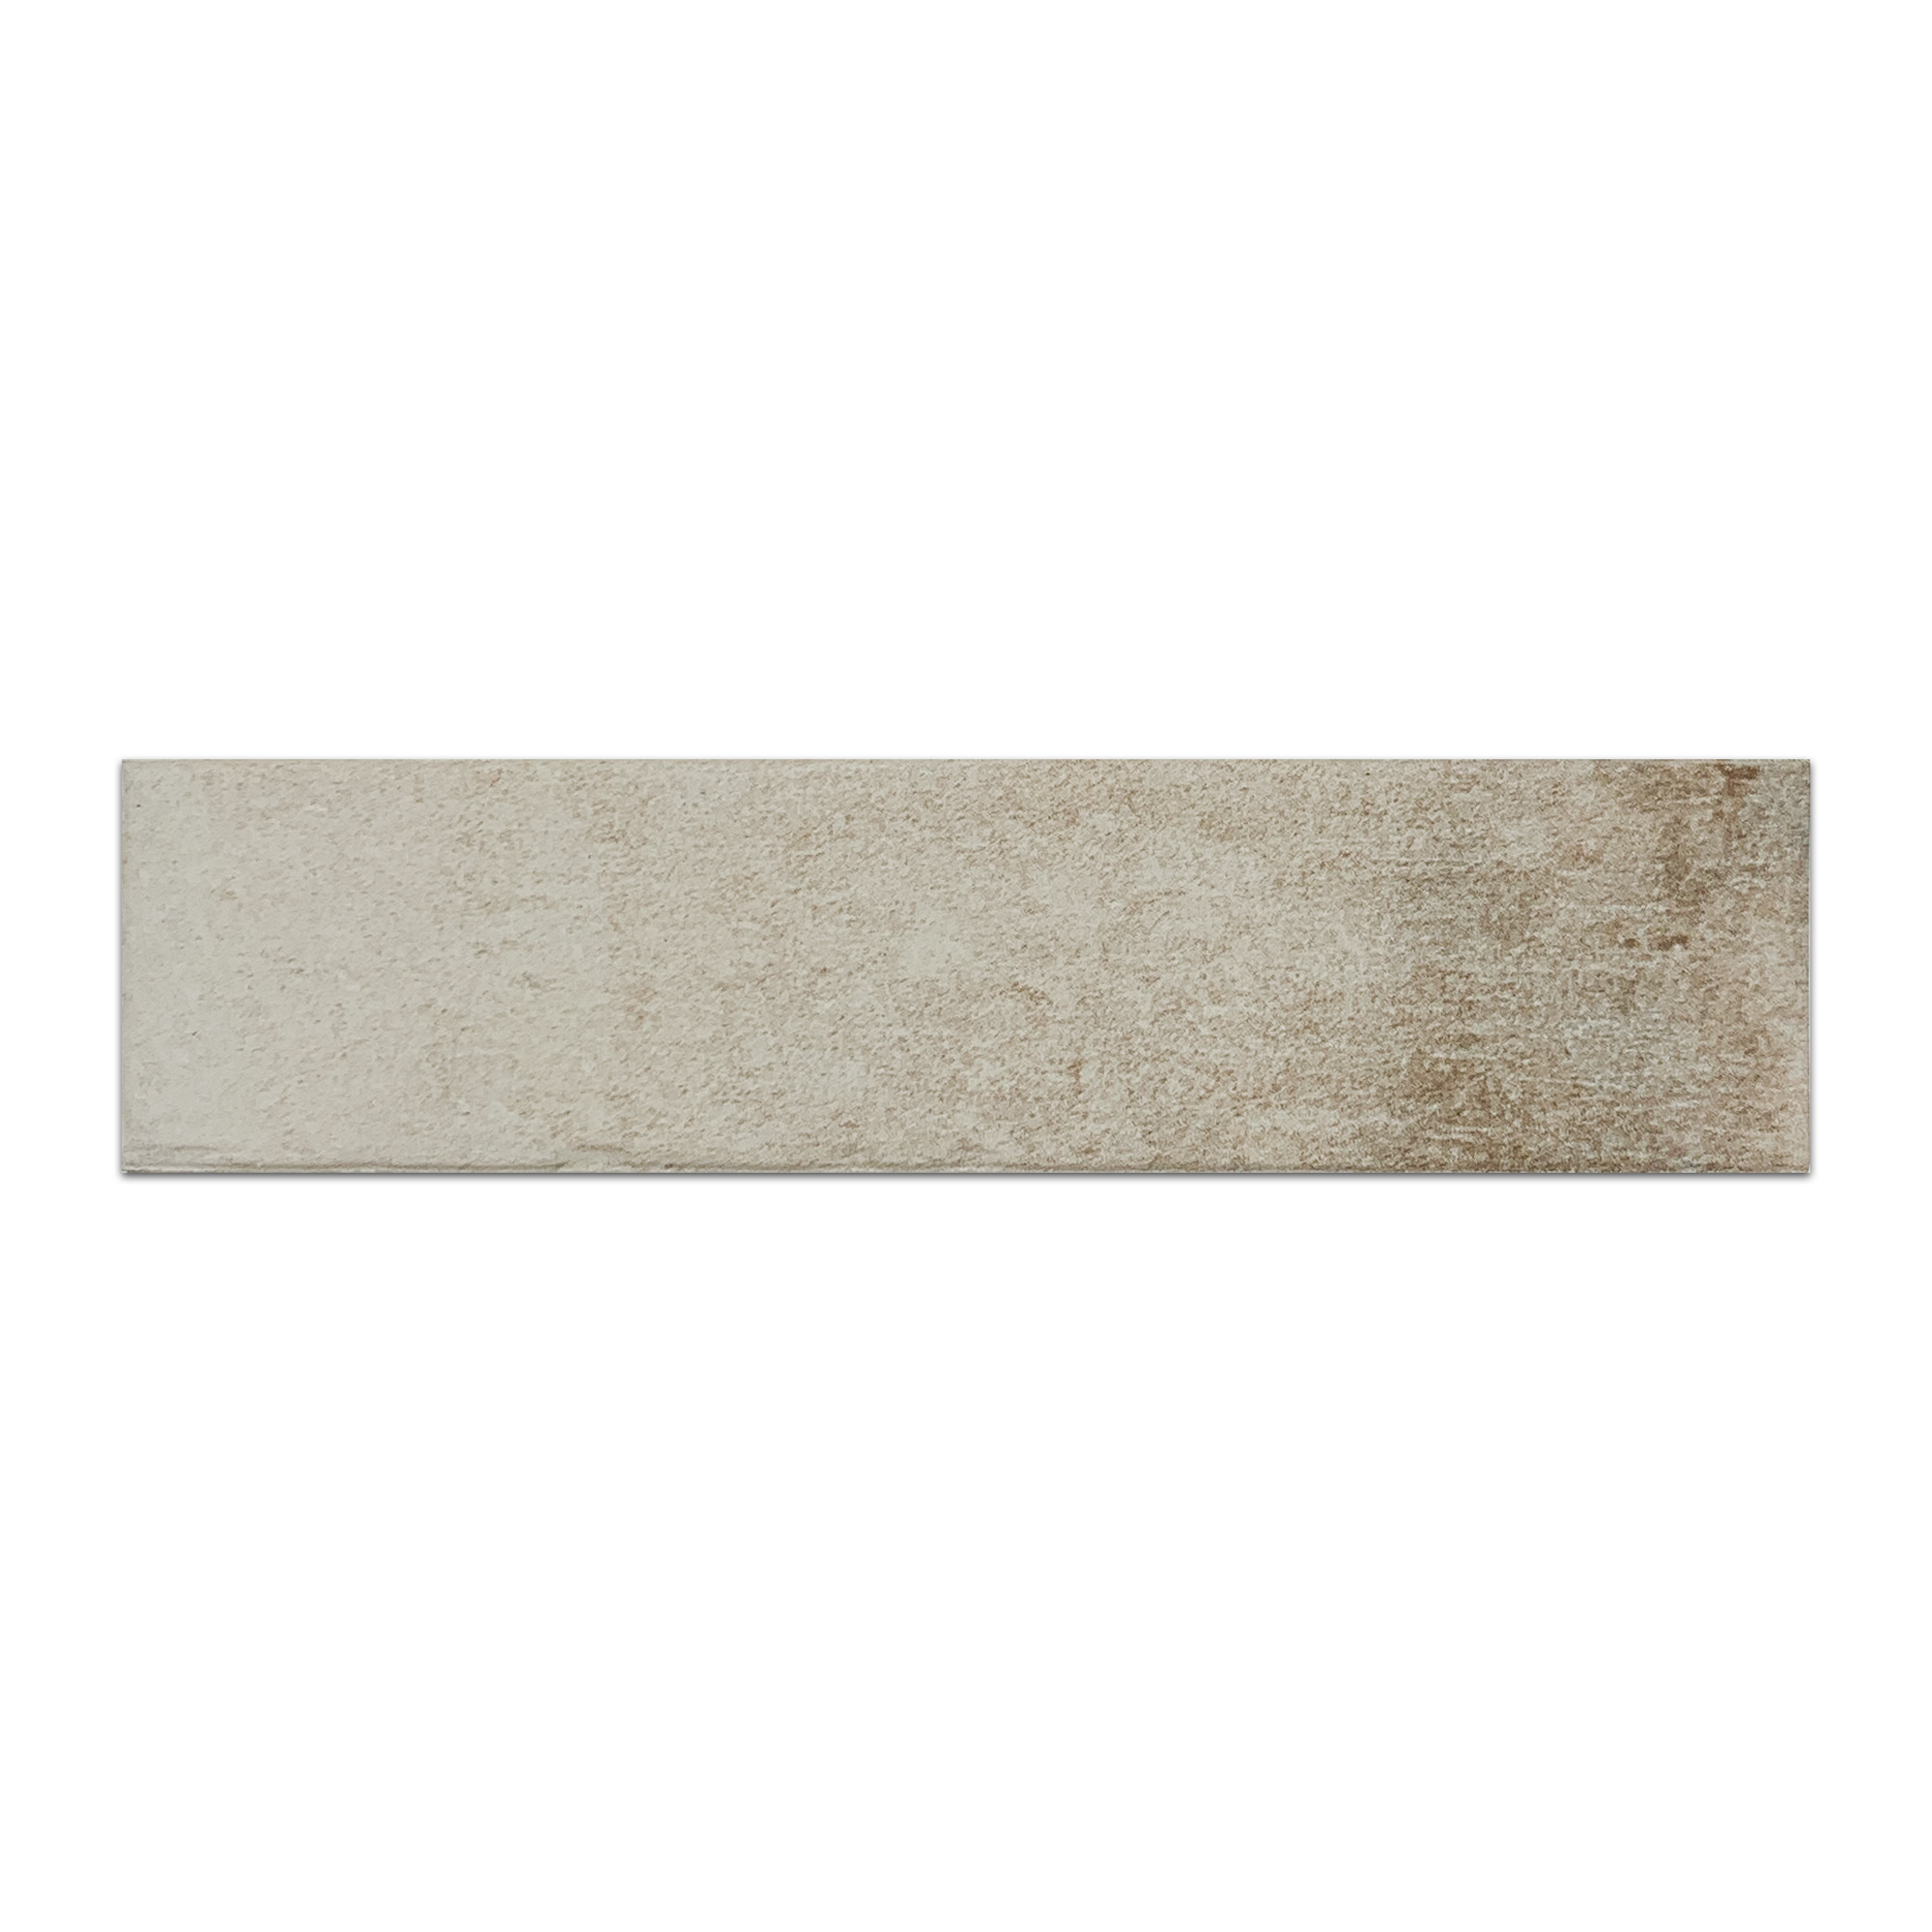 Elon Boston Brick Downtown Porcelain Rectangle Field Tile 2.5x10x0.375 Natural Pressed BC114 Surface Group International Product